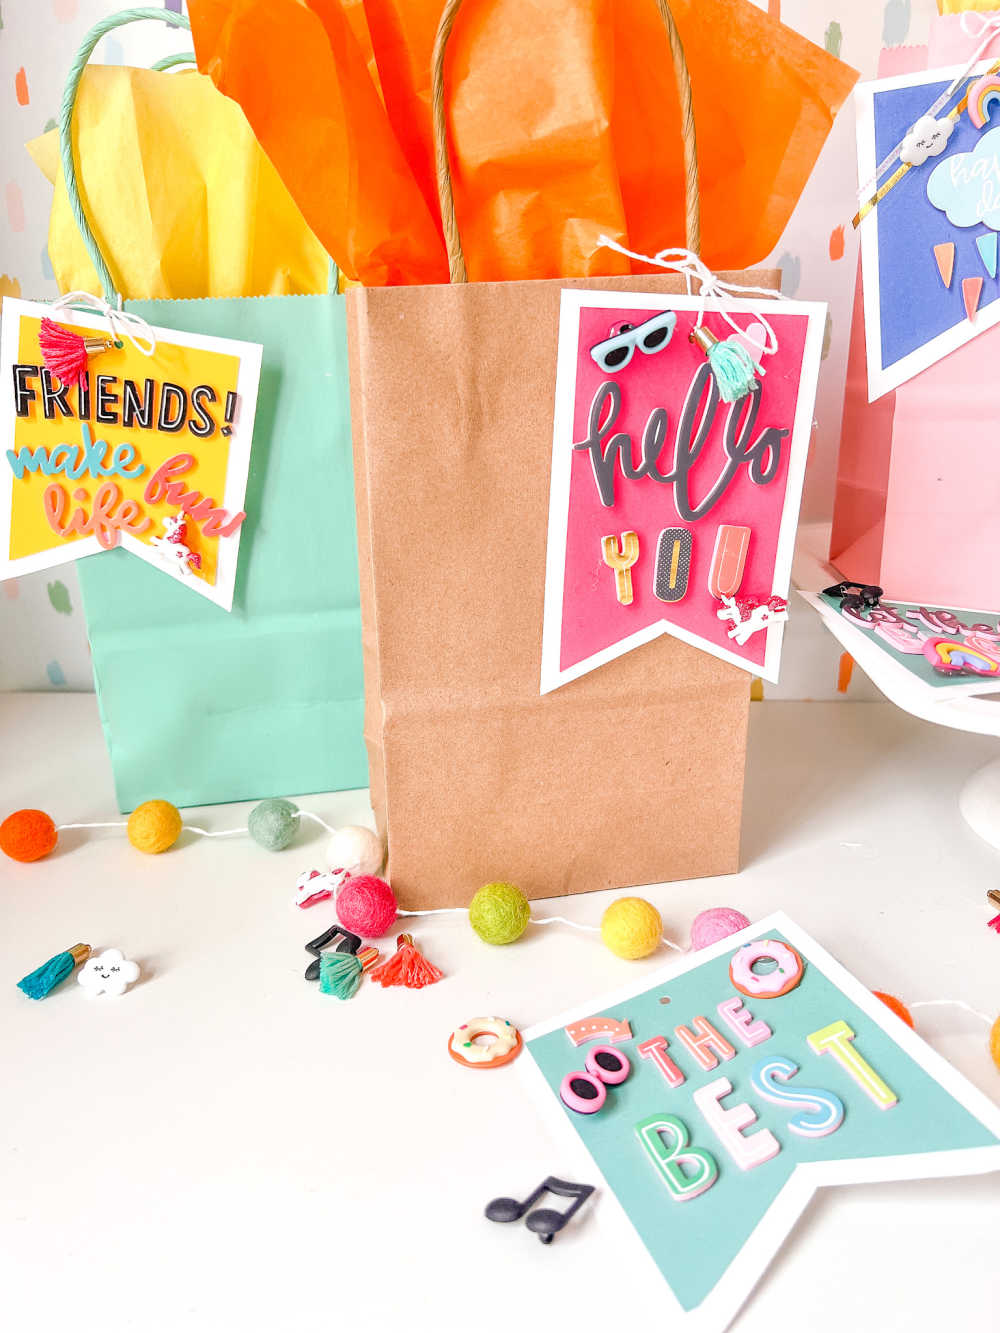 Easy 5-Minute Gift Tags! Create bright and happy gift tags for anyone using paper and embellishments from The Paper Studio at Hobby Lobby!